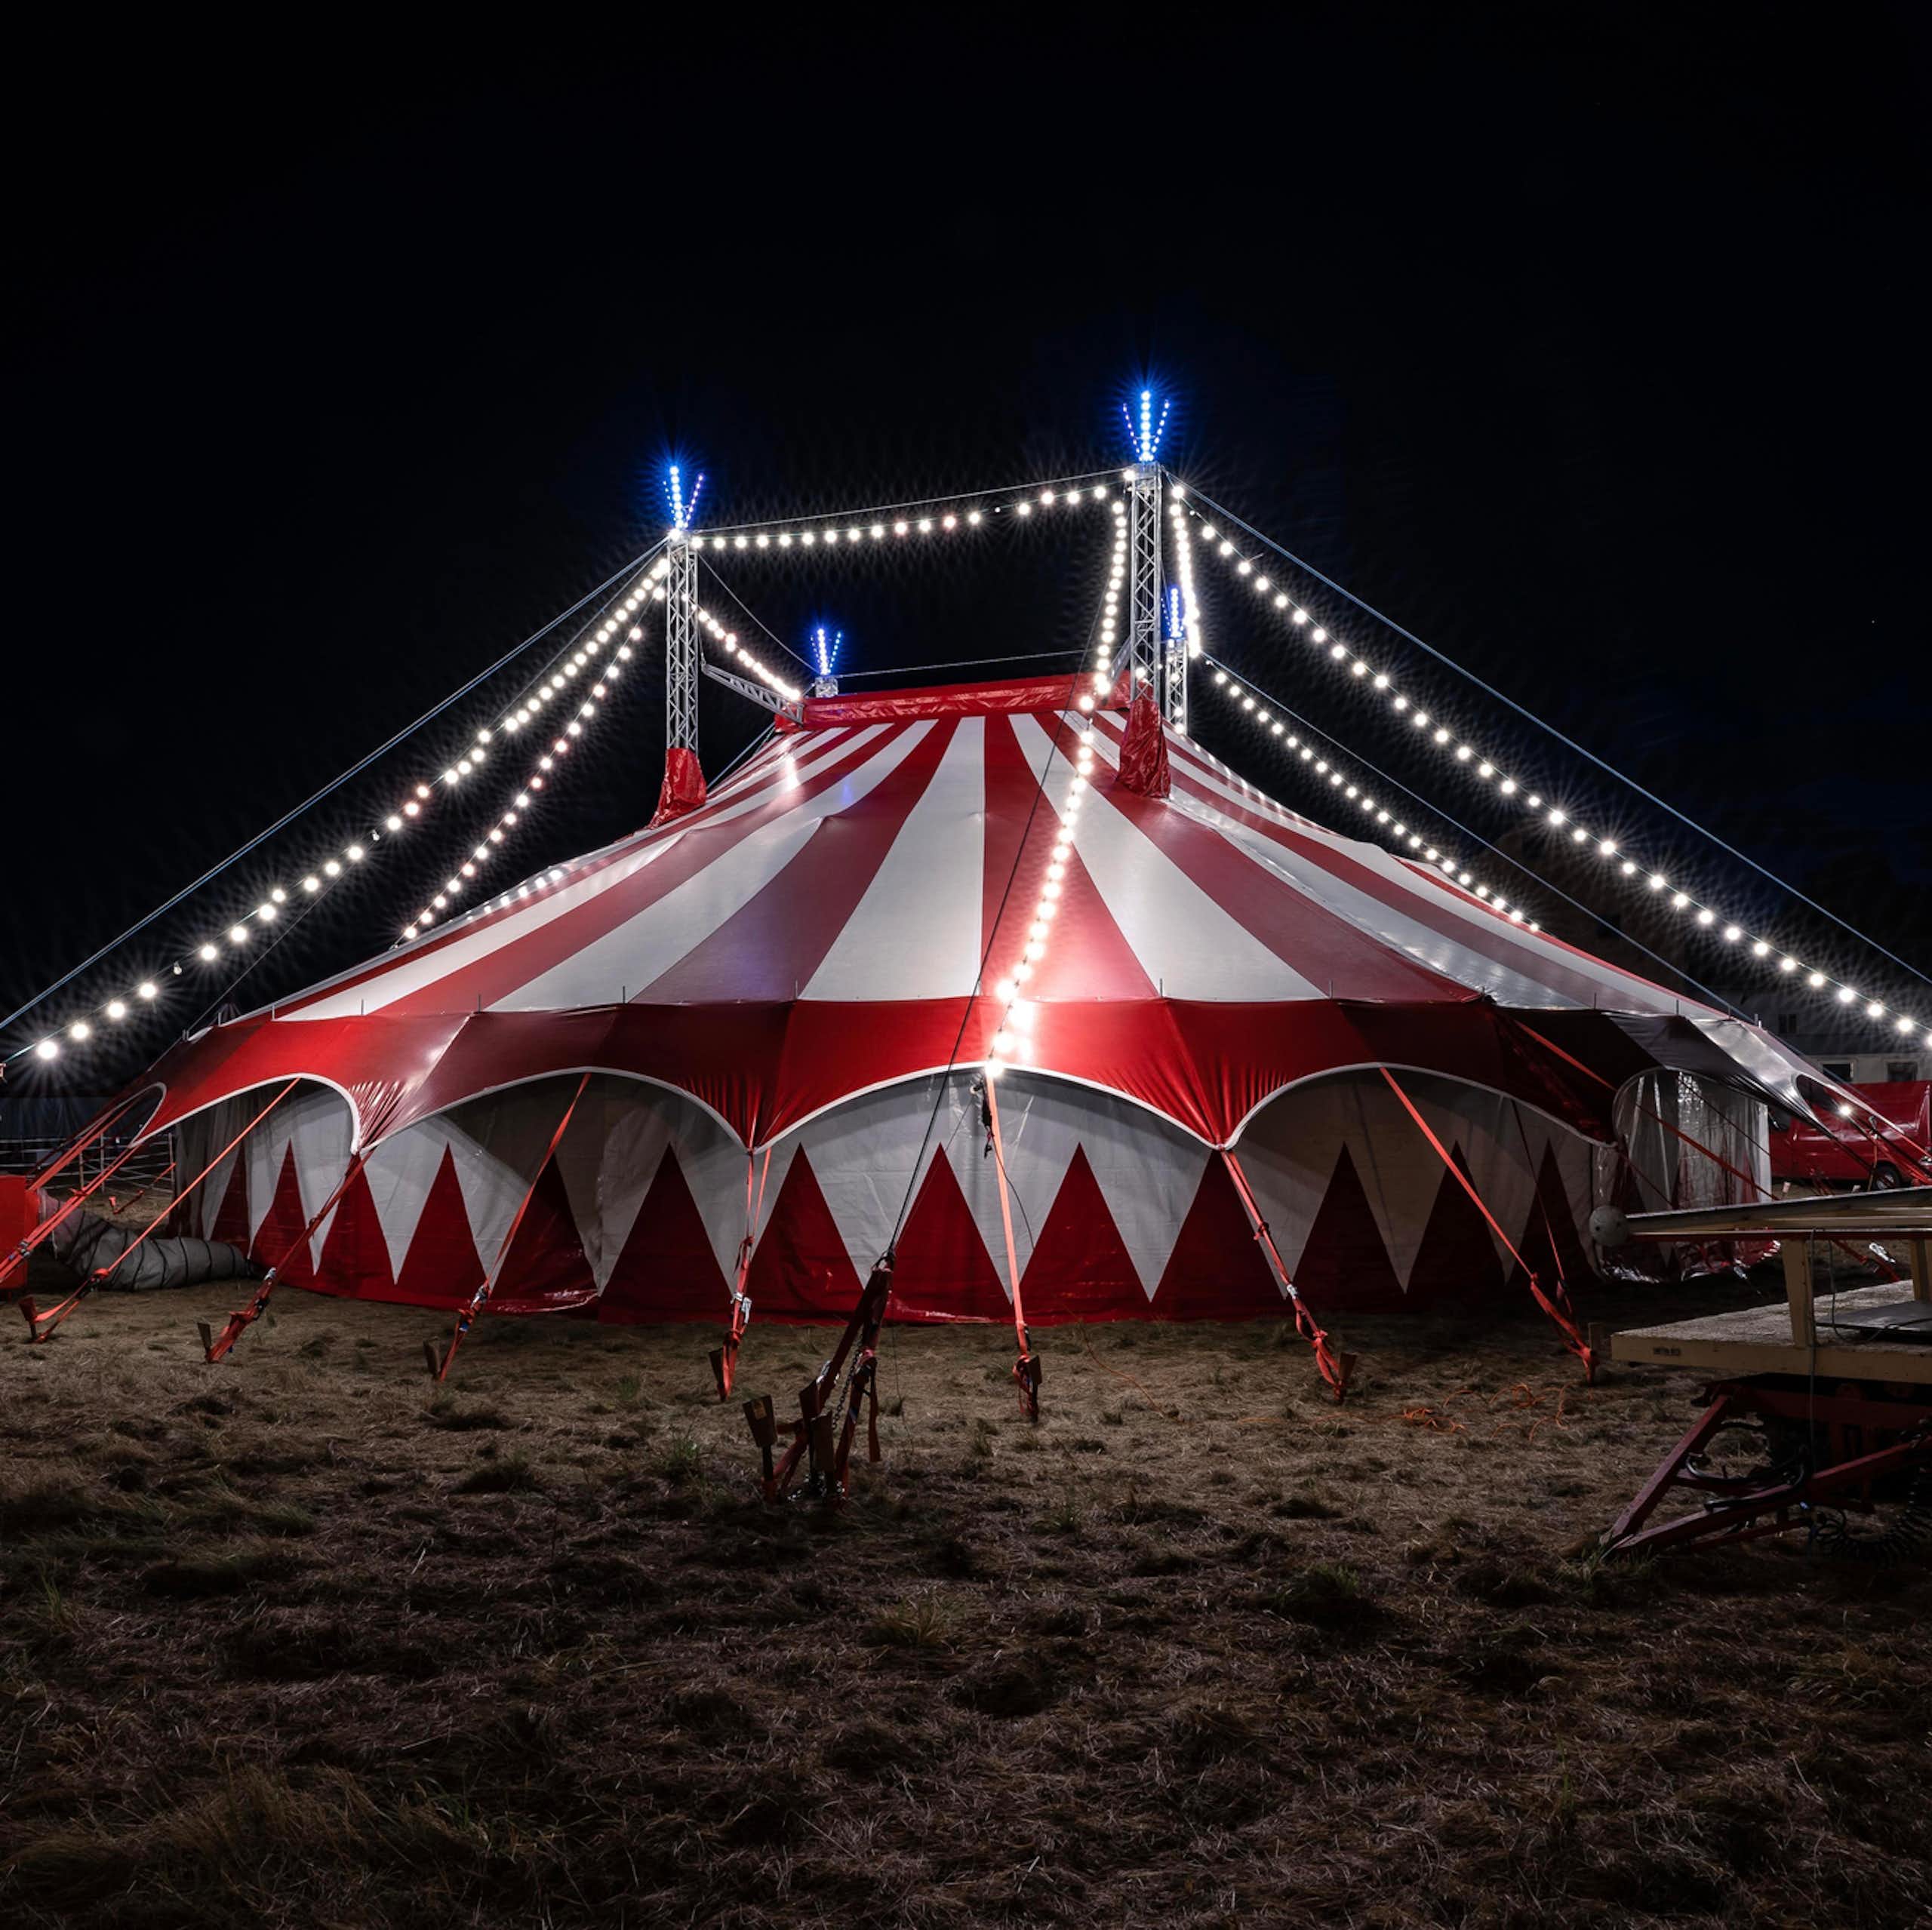 A red and white circus tent in a field at night, lit up with small white strings of lights.